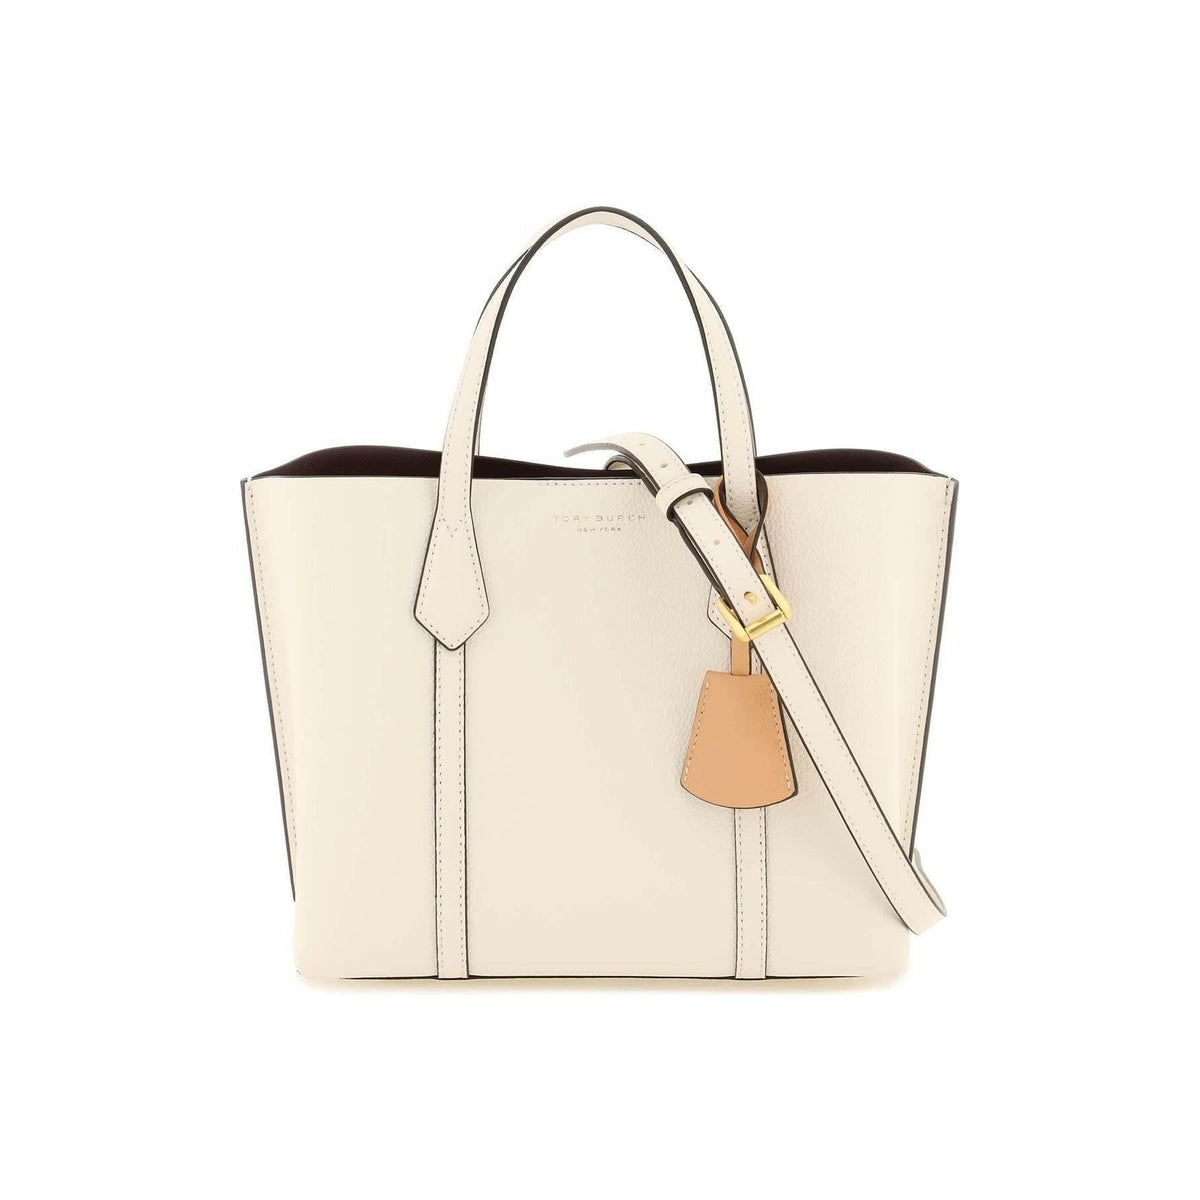 TORY BURCH - New Ivory Small Perry Leather Shopping Bag - JOHN JULIA